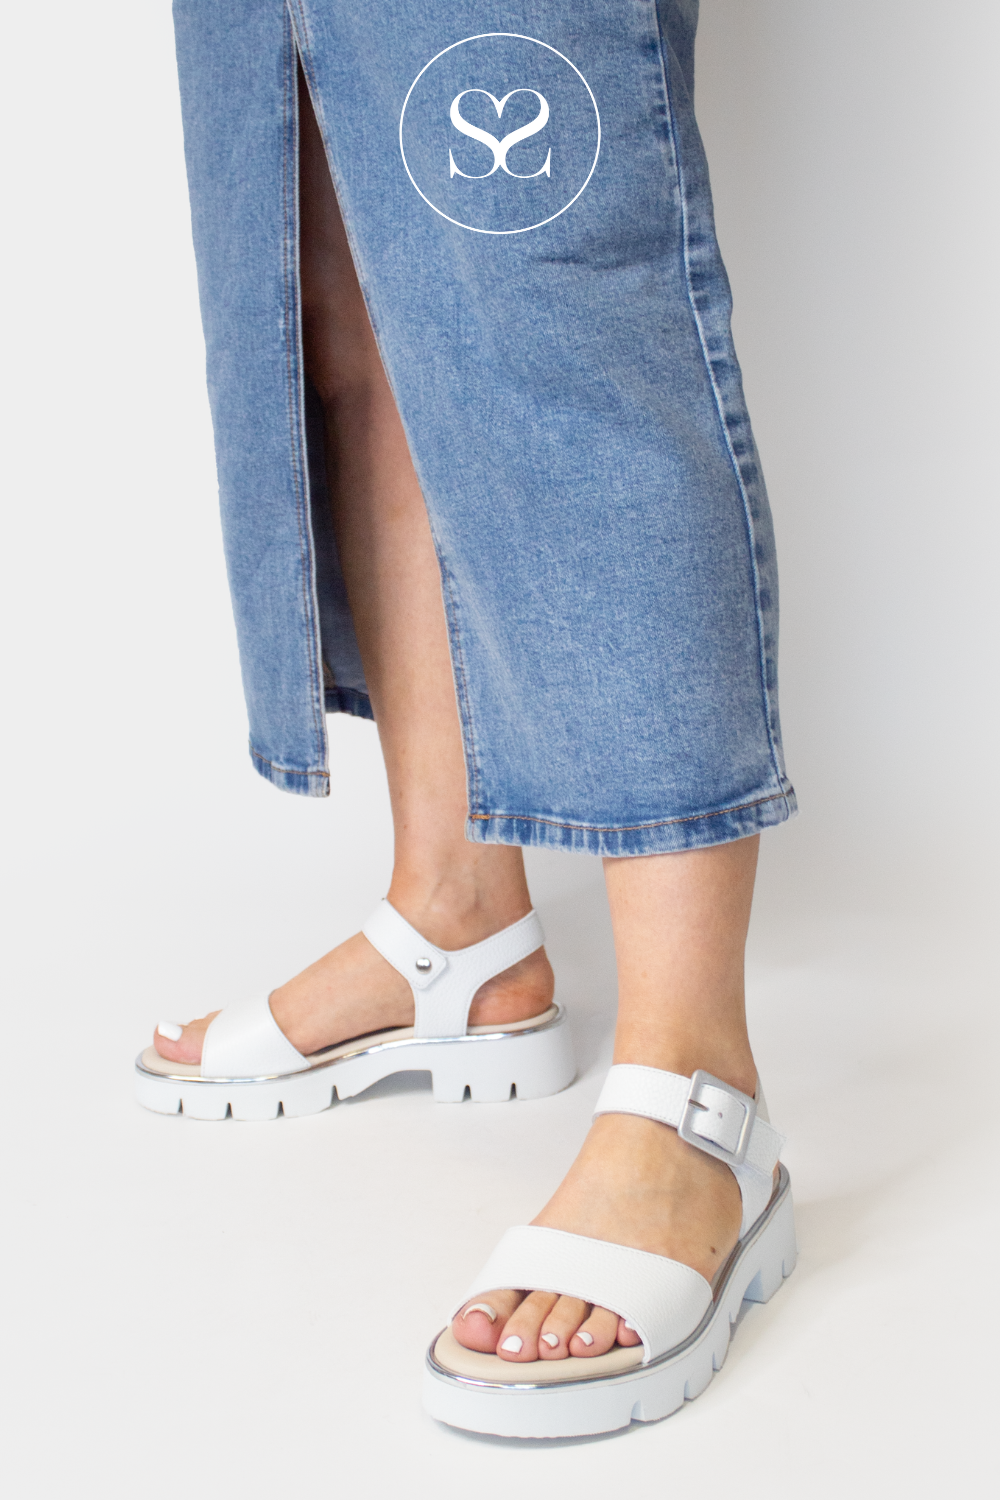 paul green chunky white leather sandals